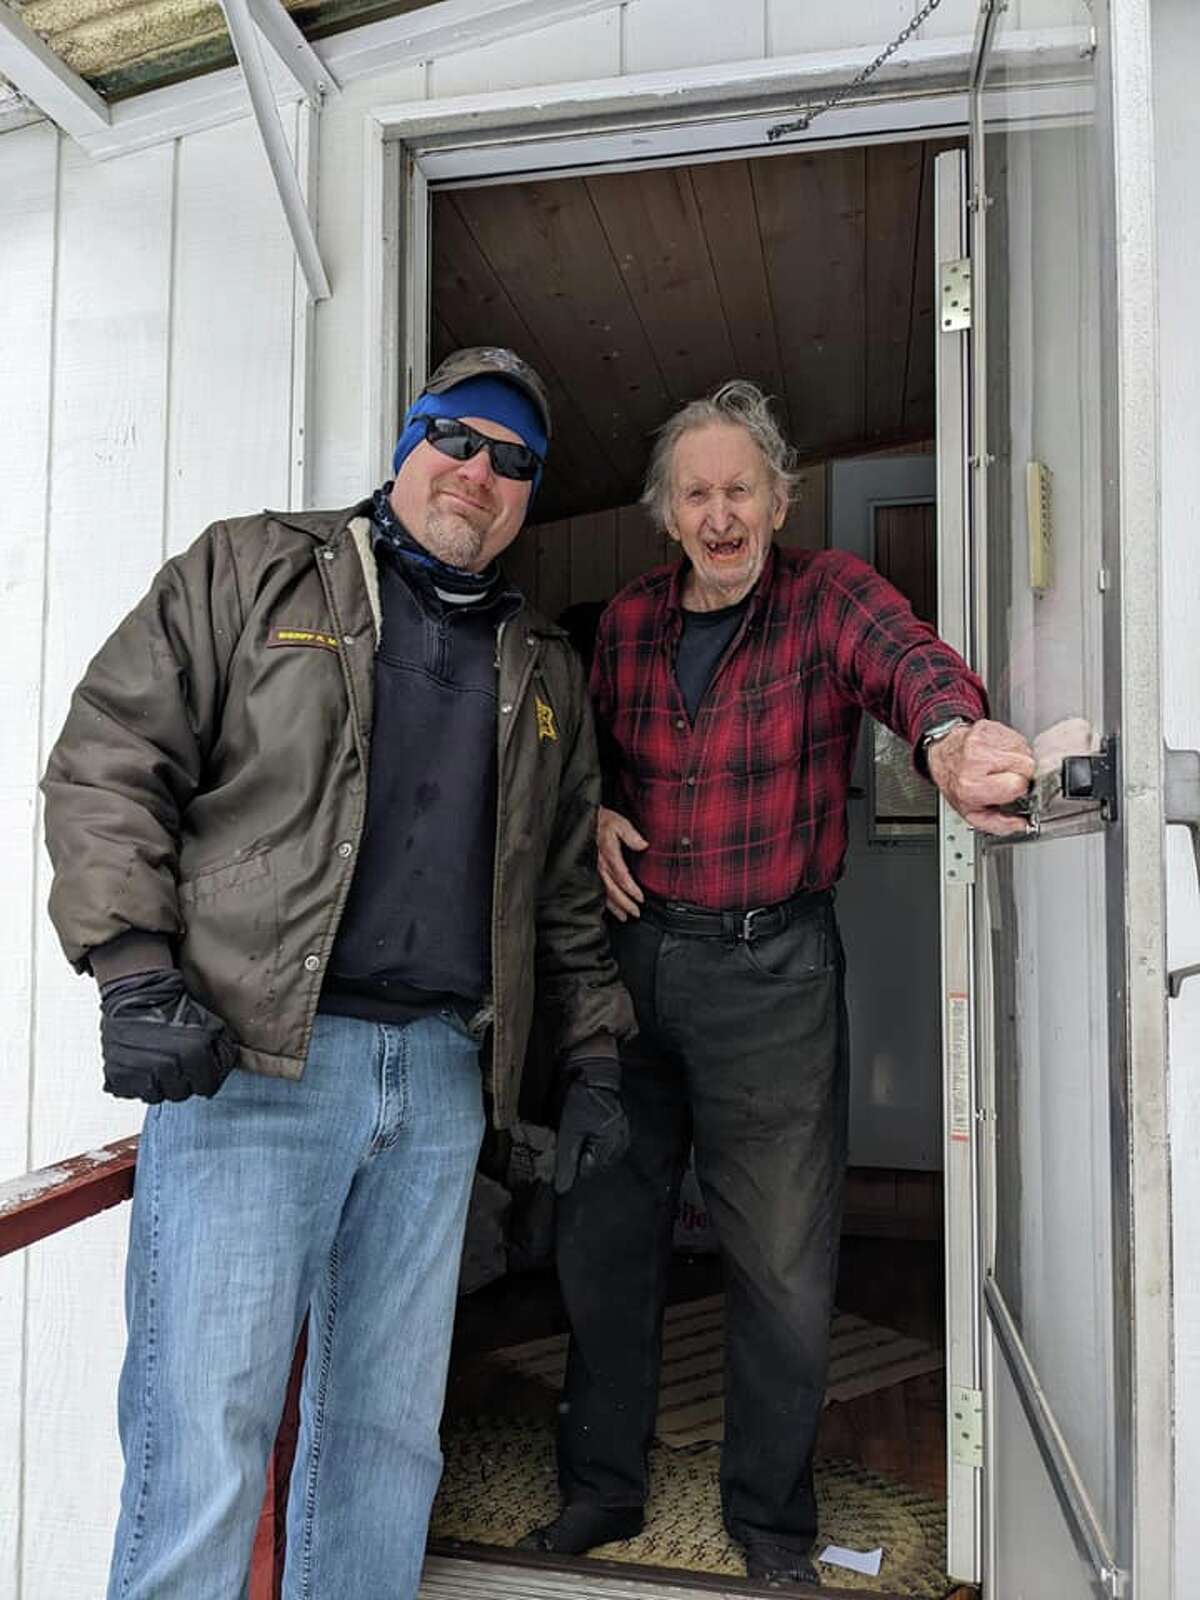 Lake County resident and WWII veteran William Zwiegle, right, is all smiles as Lake County Sheriff Rich Martin, along with Pleasant Plains Fire Chief Chad Schaap and Manistee Forest ORV Club member Howard Campbell, work to replace his mailbox that was destroyed by an errant driver.